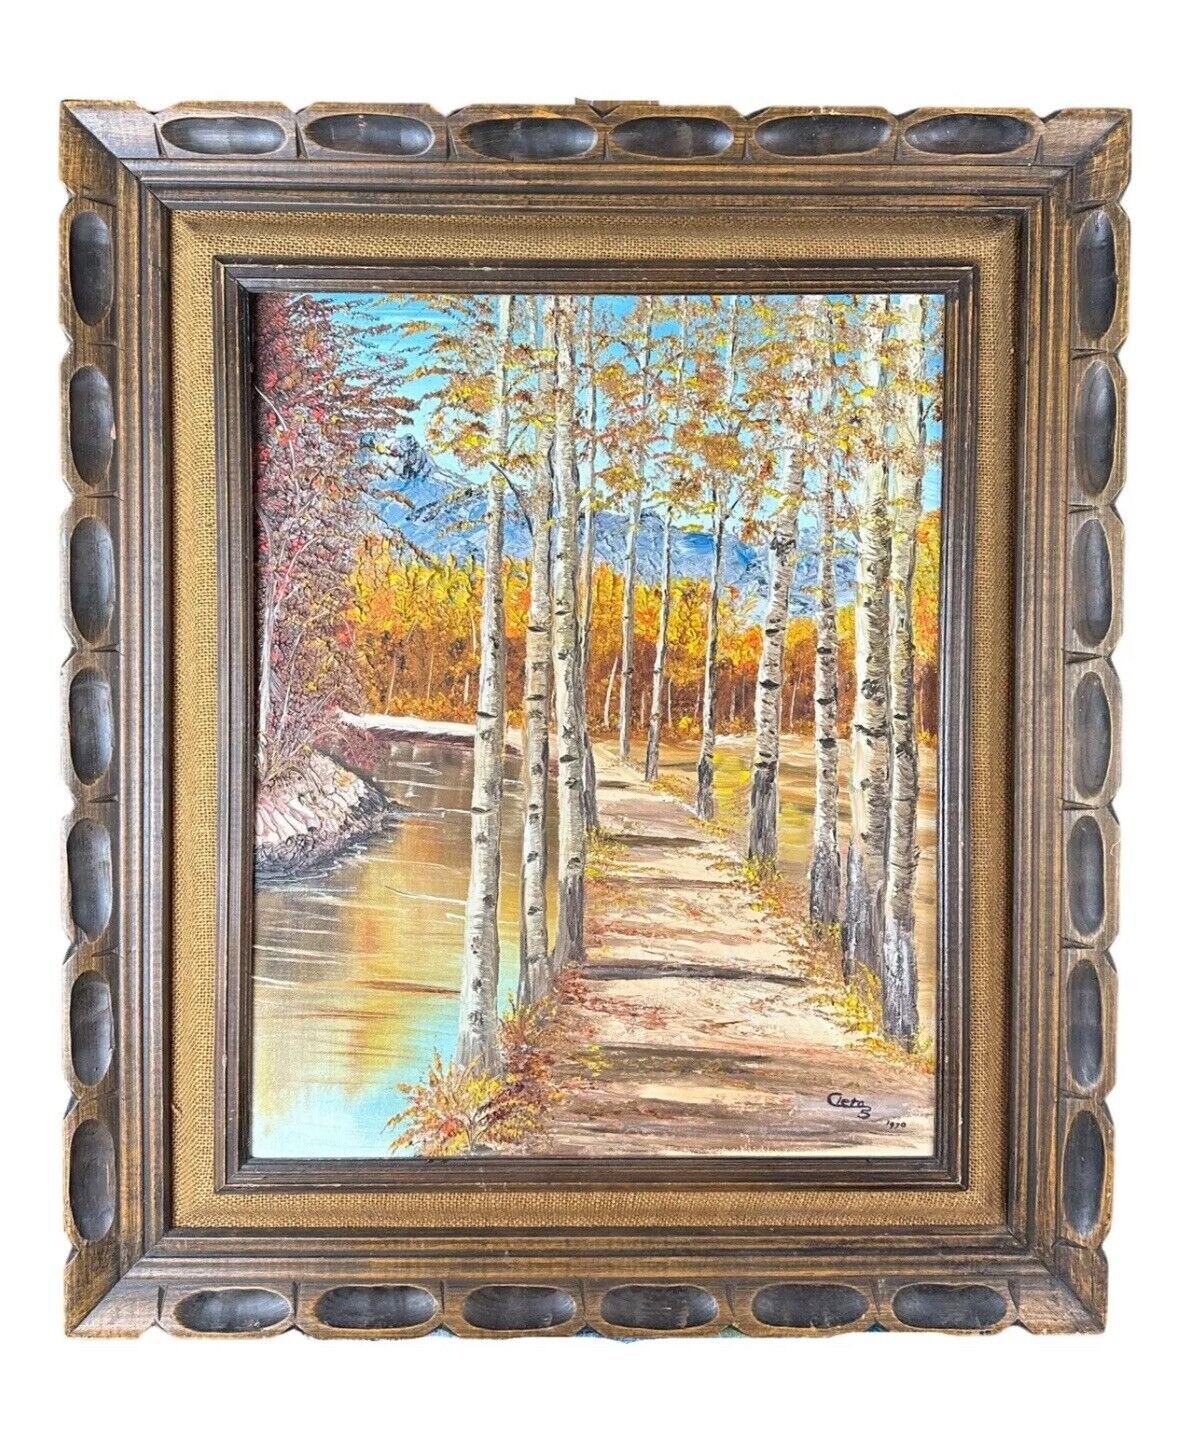 CIETAS Vintage (1970's) Abstract Landscape Oil Painting in Carved Wood Frame